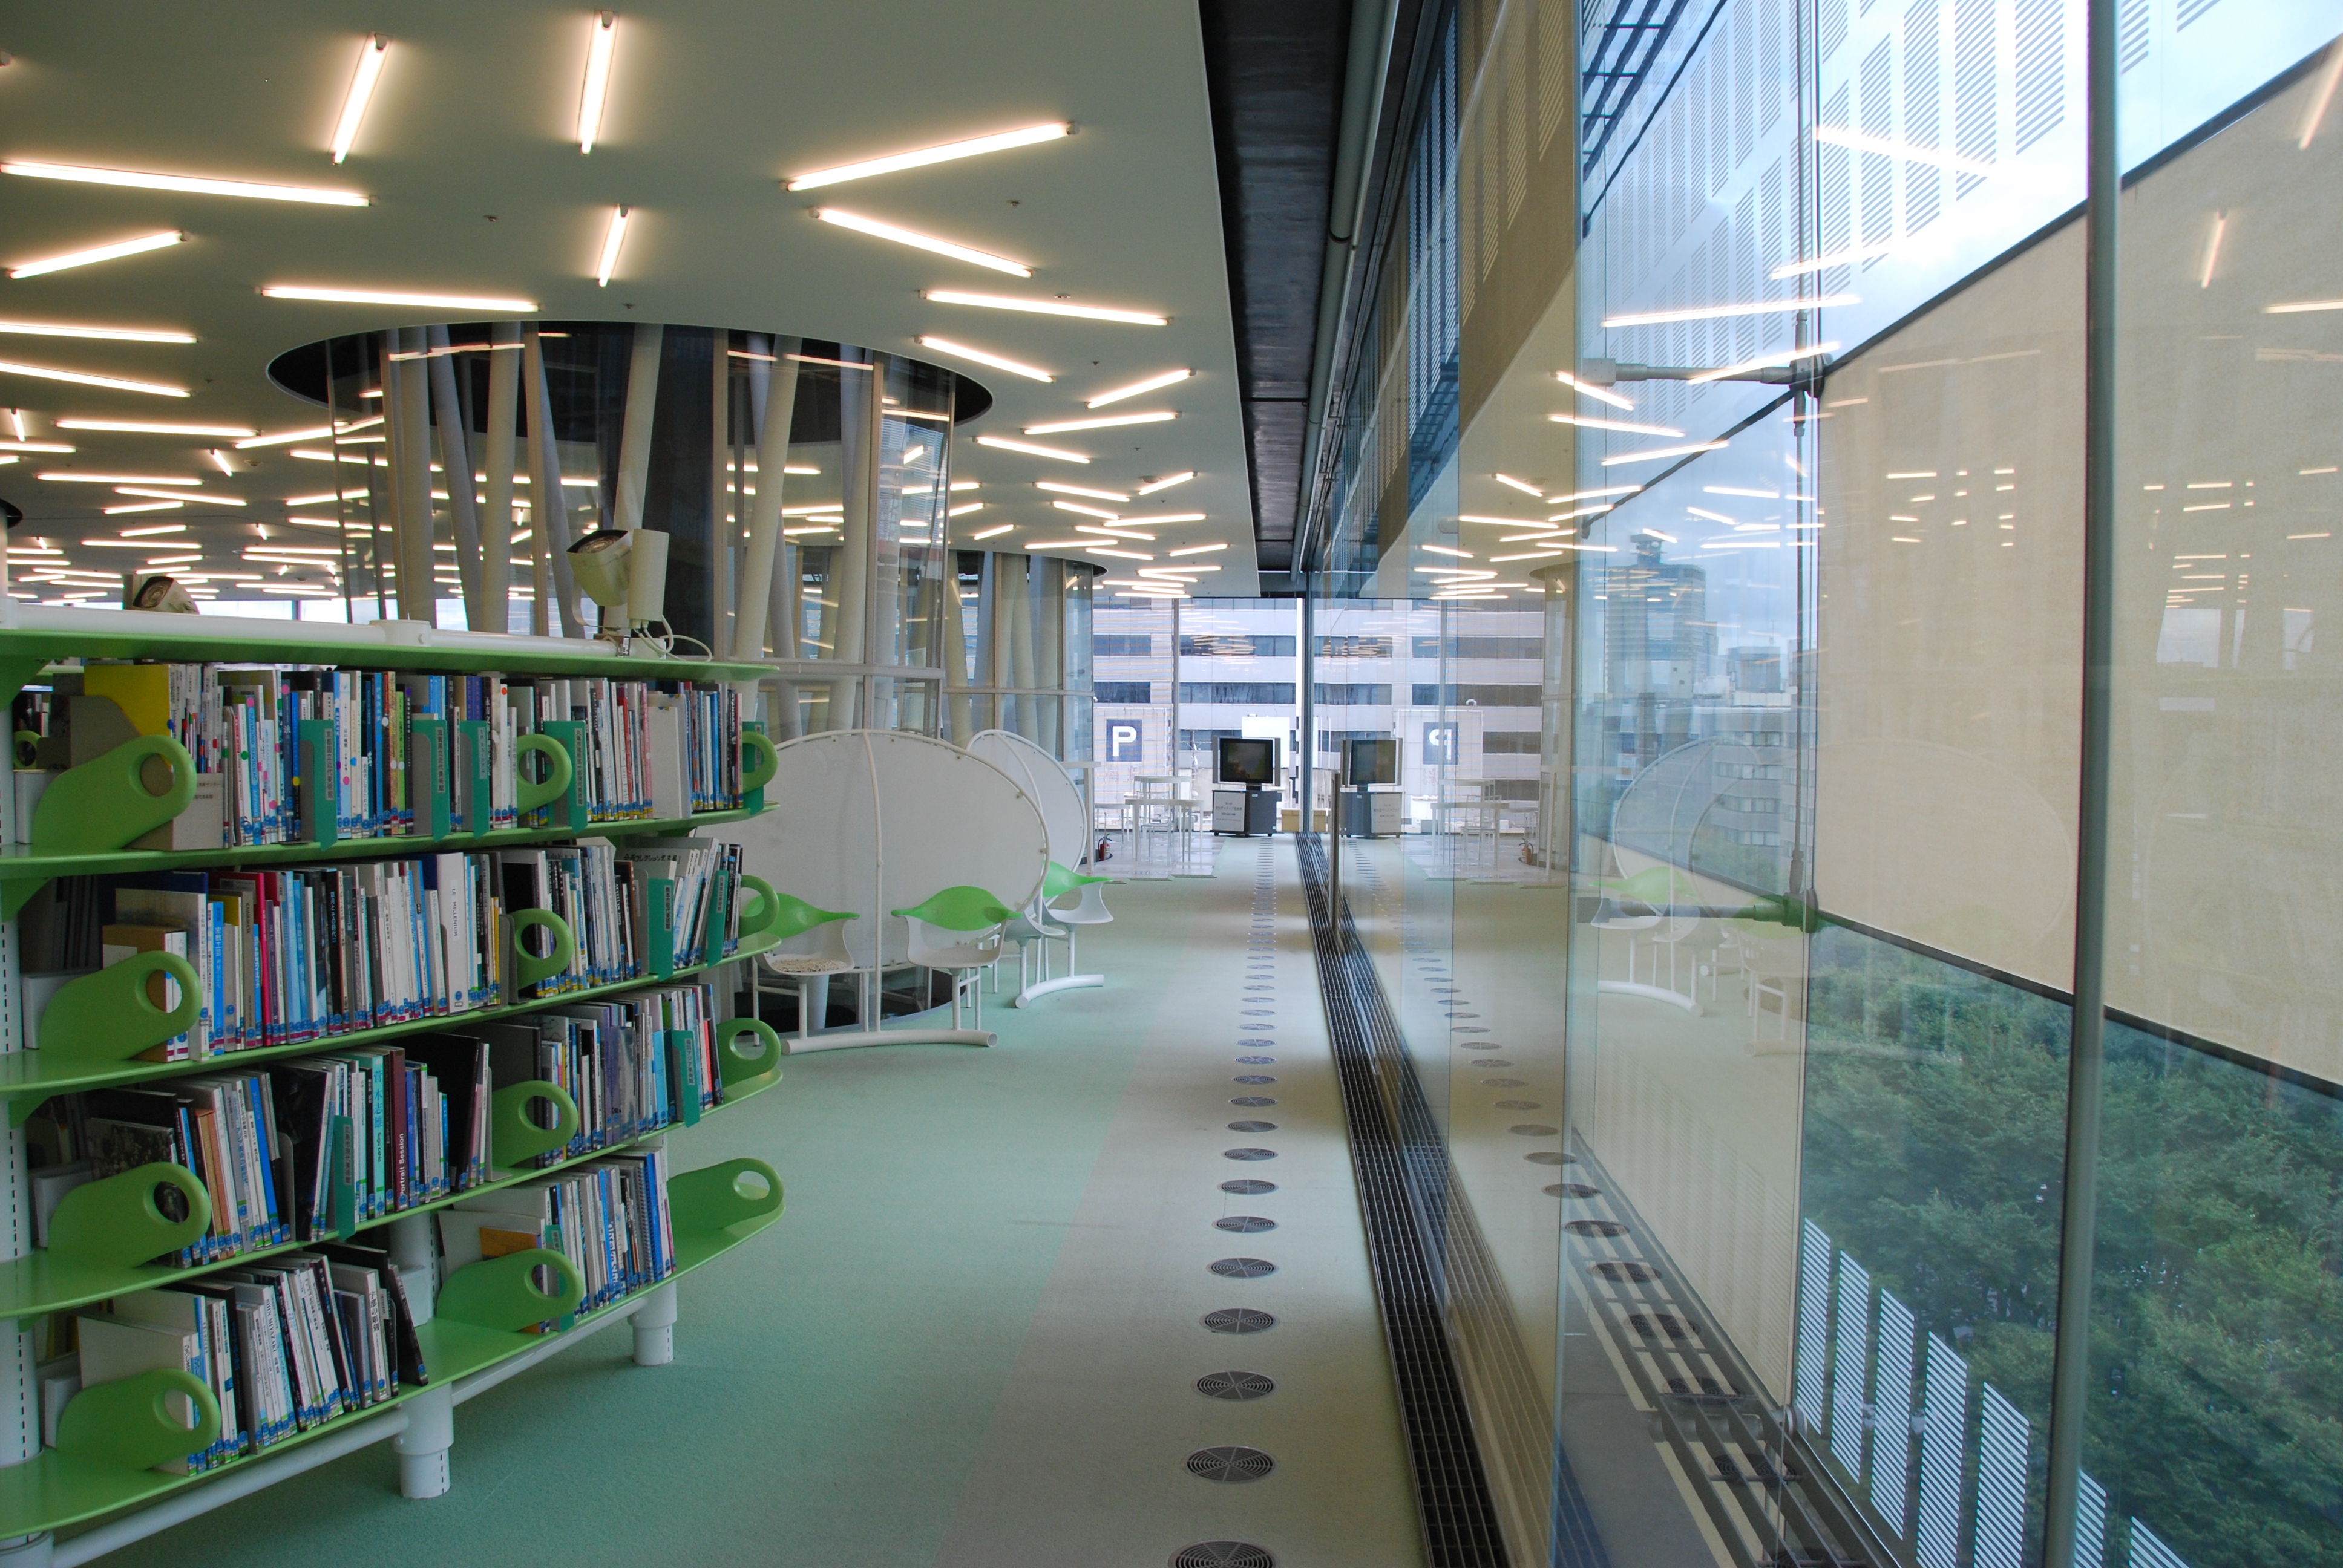 Image of interior of library